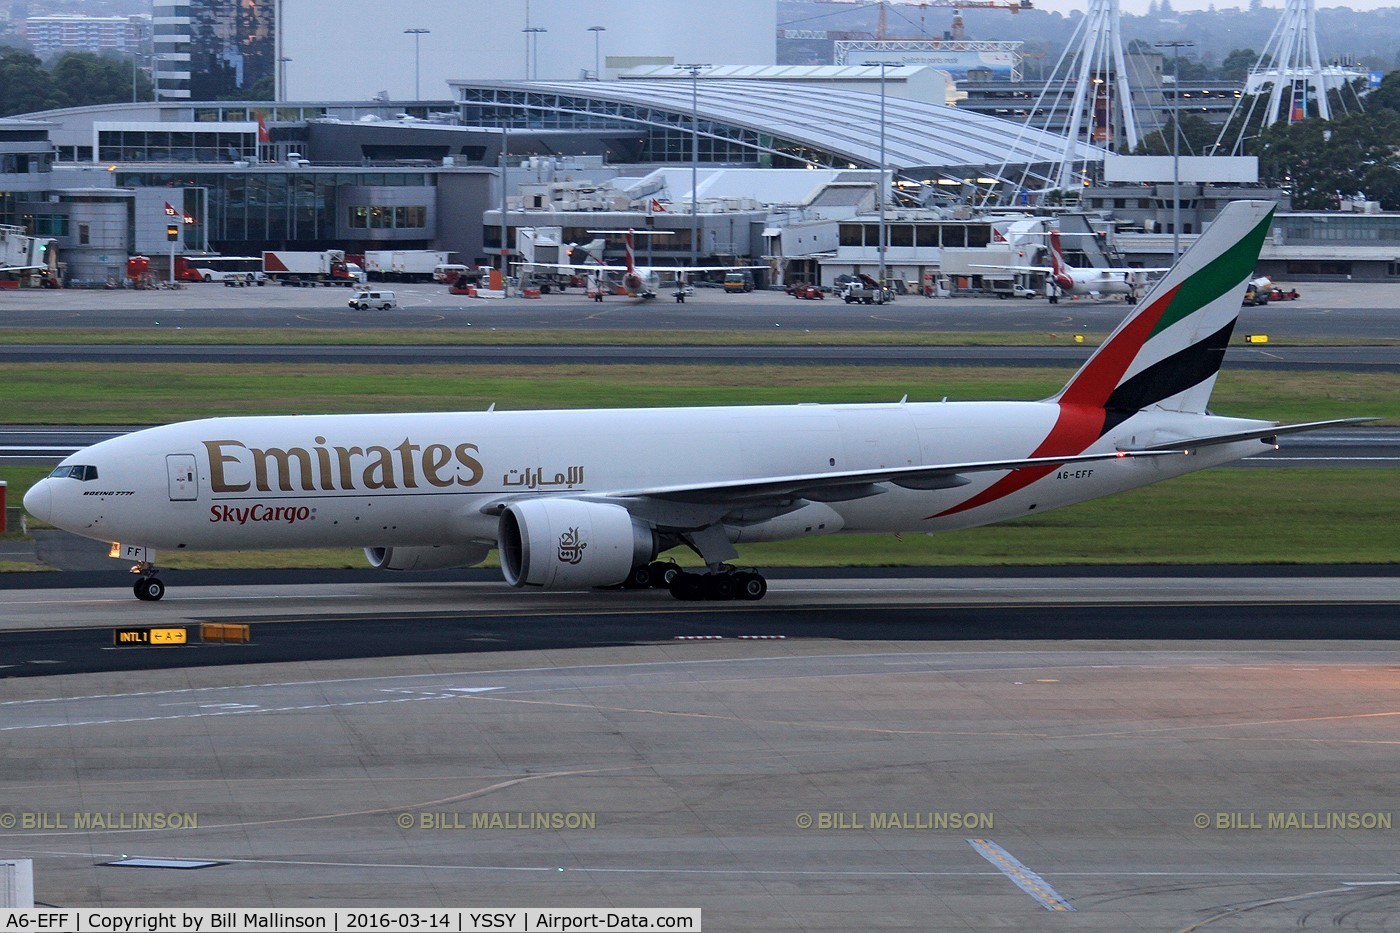 A6-EFF, 2011 Boeing 777-F1H C/N 35612, taxiing to cargo area